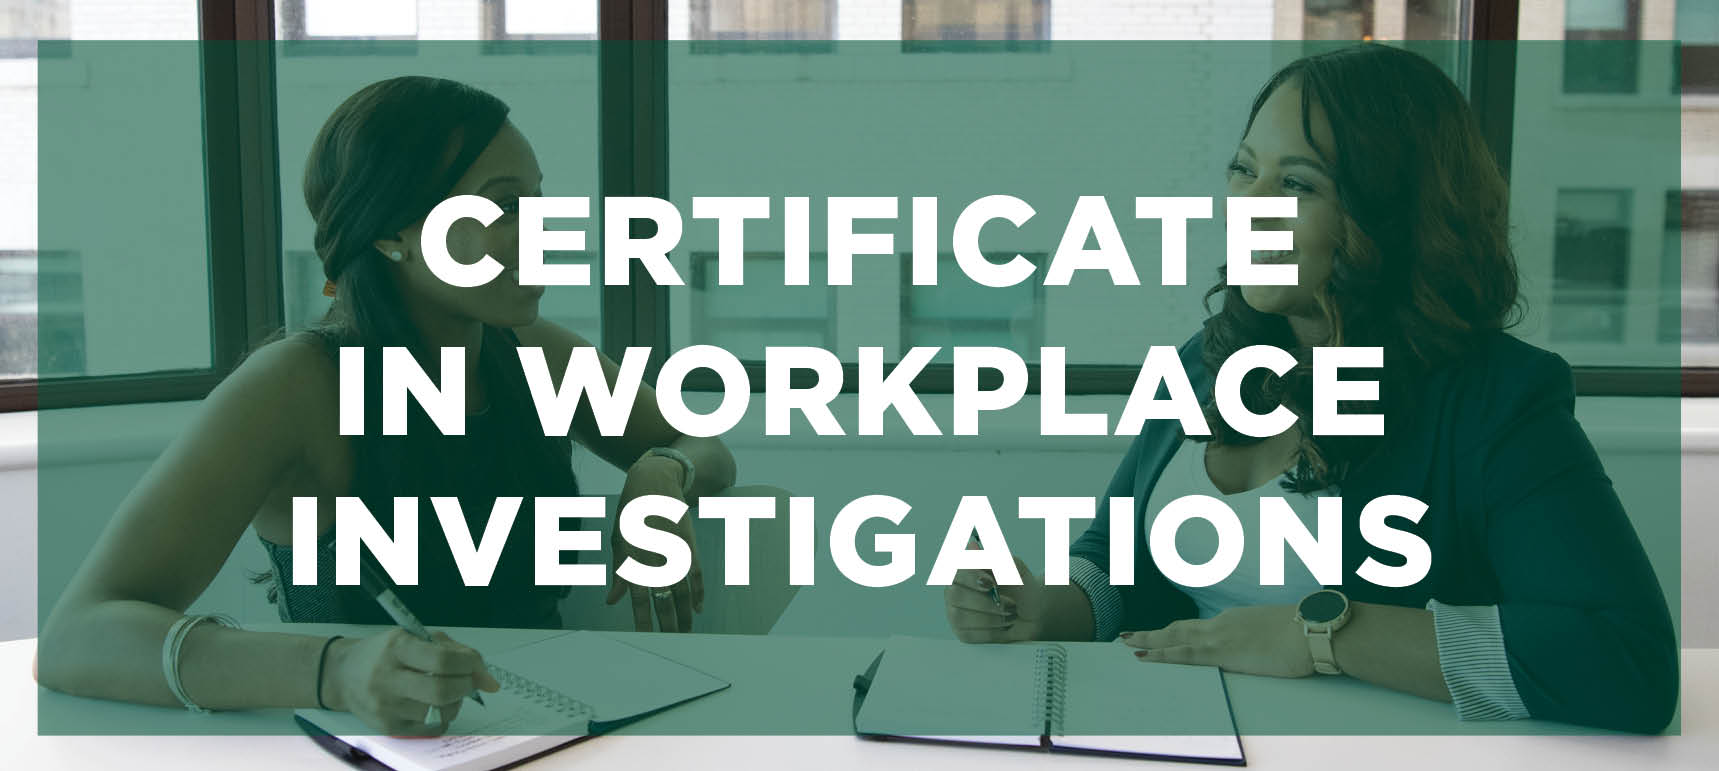 Certificate in Workplace Investigations